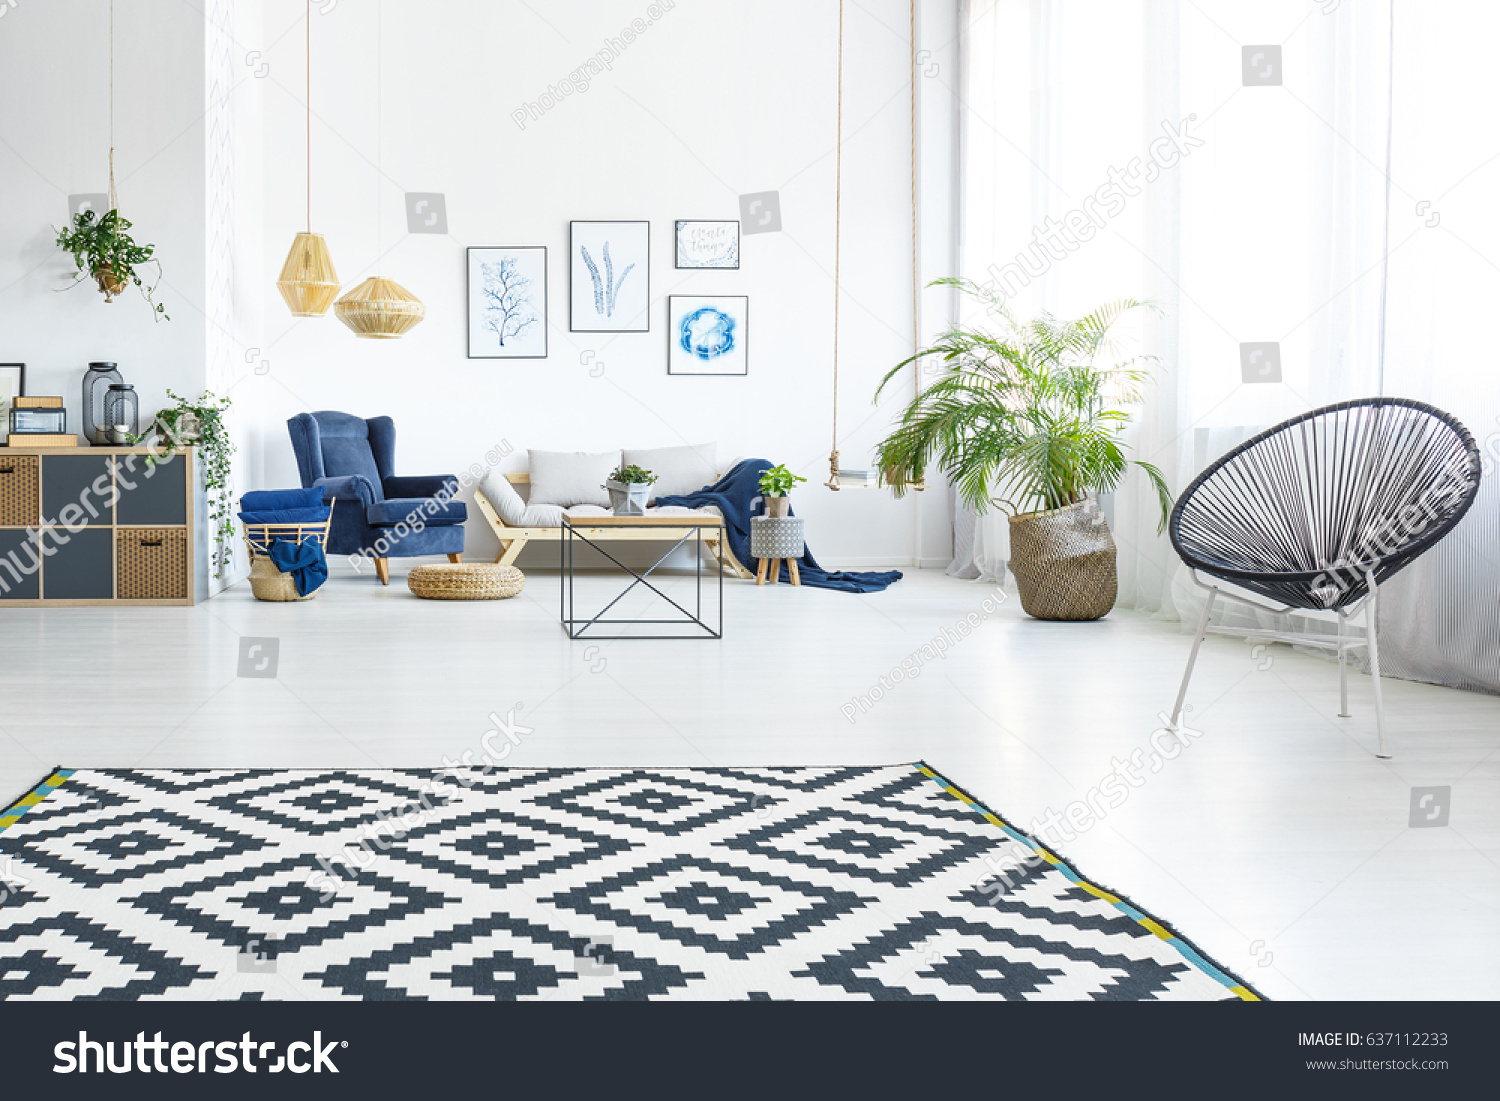 Modern living room with sofa, round chair and pattern carpet #637112233